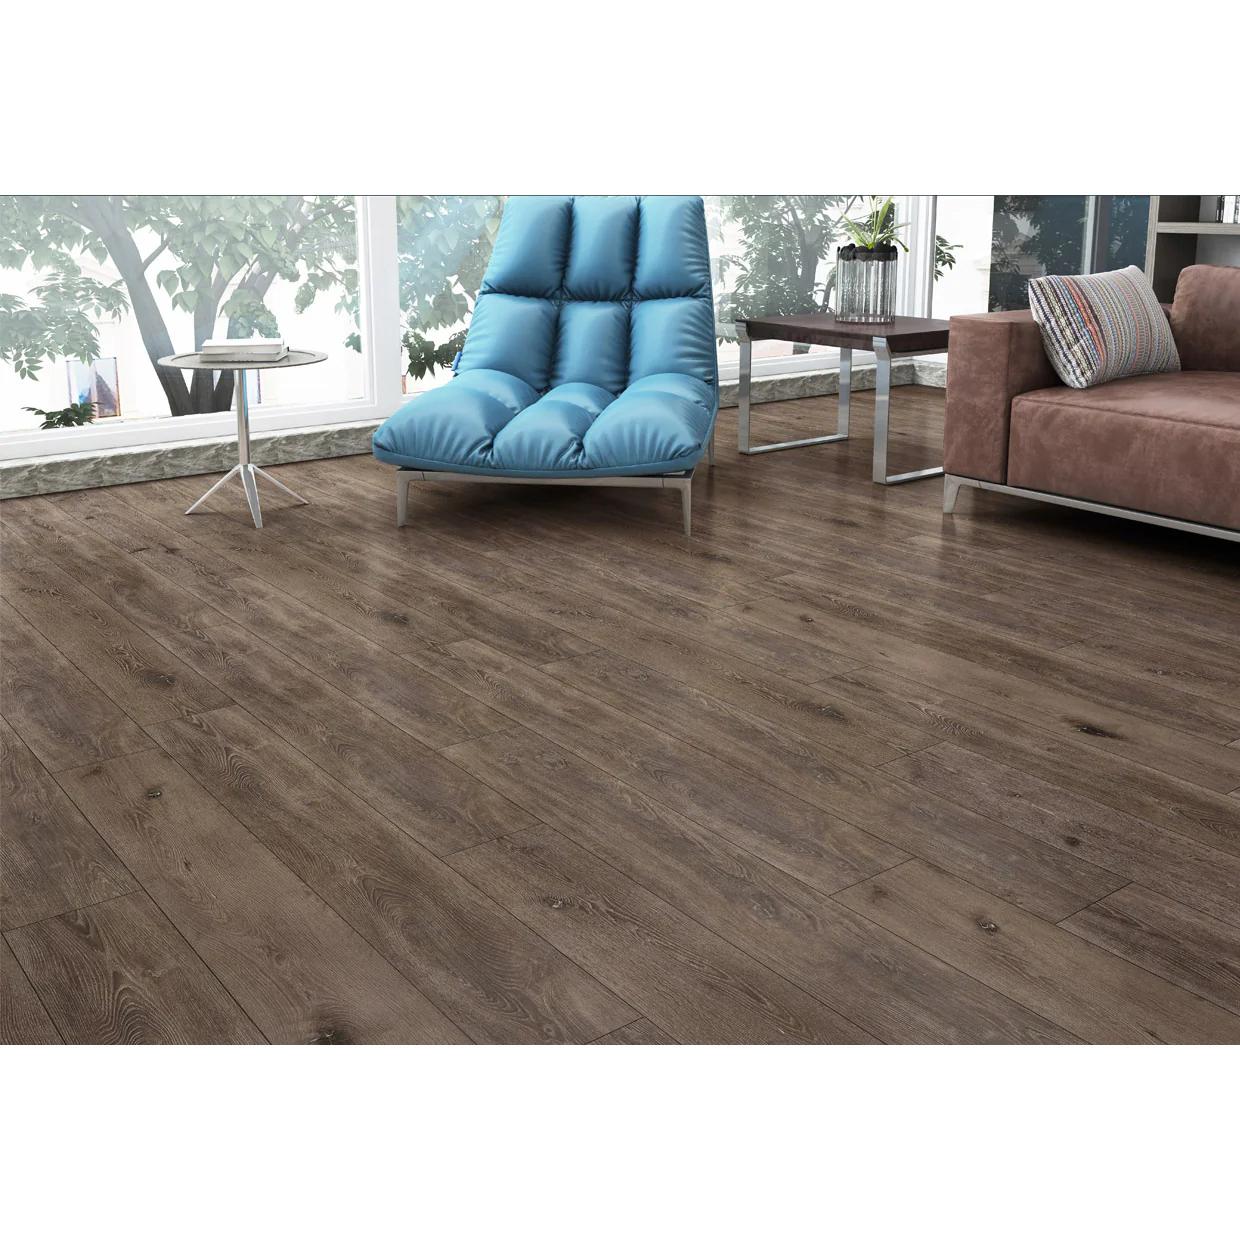 smoked oak vinyl plank flooring - What is the difference between vinyl plank and luxury plank flooring